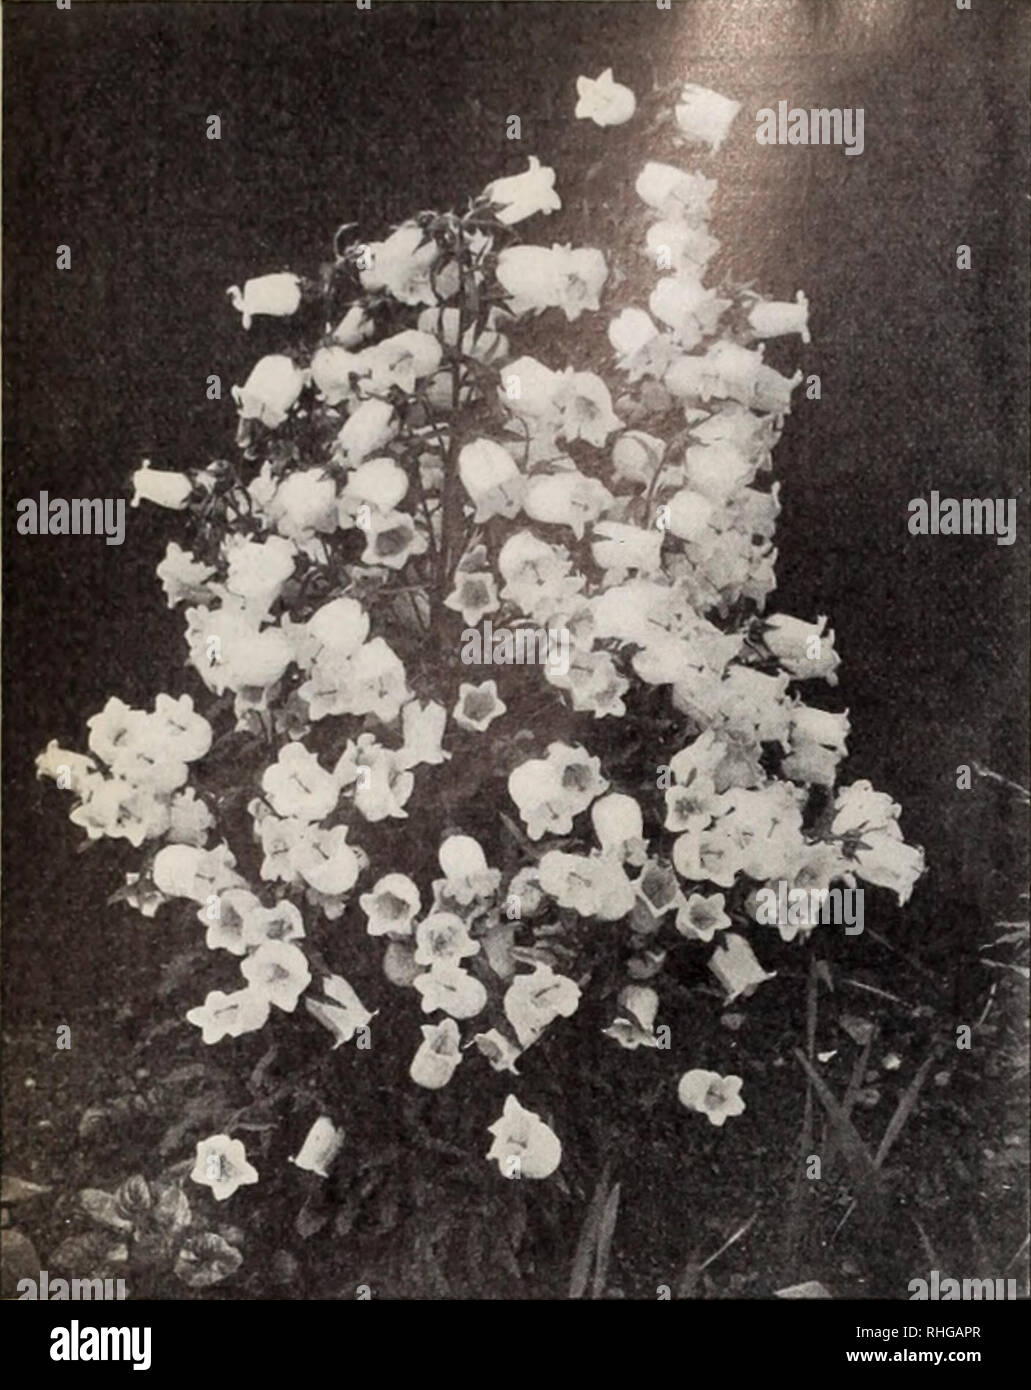 . Boddington's quality bulbs, seeds and plants / Arthur T. Boddington.. Nursery Catalogue. 20 Arthur T.Boddinpton. 342 West 14th St.. New Vork City. Campanula Media (Canterbury Bells) Candytuft (Iberis) h.a. BODDINGTON'S GIANT HYACINTH-FLOW- Pkt. Oz. ERED. Large pure white spiral spikes $o 35 Empress, i ft. Pure white pyramidal 10 $0 50 White Rocket. Large trusses 05 30 Umbellata albida. Creamy white 05 30 &quot; carnea. i ft. Flesh-colored 05 40 &quot; lilacina. i ft. Lilac 05 25 &quot; carminea. i ft. Bright carmine 05 40 &quot; Queen of Italy. Light lilac; very free-flow- ering 10 50 &quot; Stock Photo